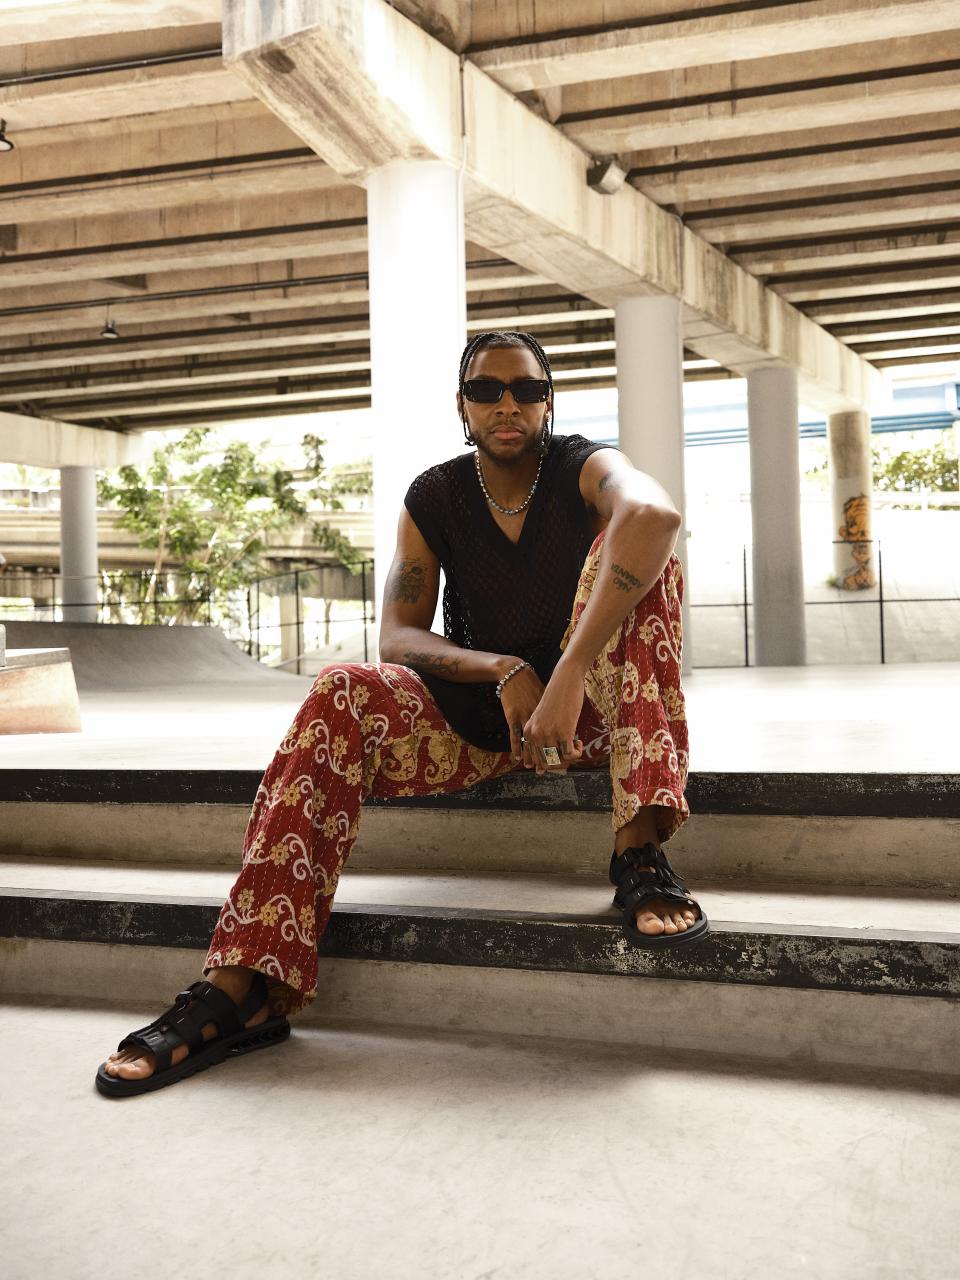 Masego poses in Kenner shoes in Miami for the brand's campaign shoot.